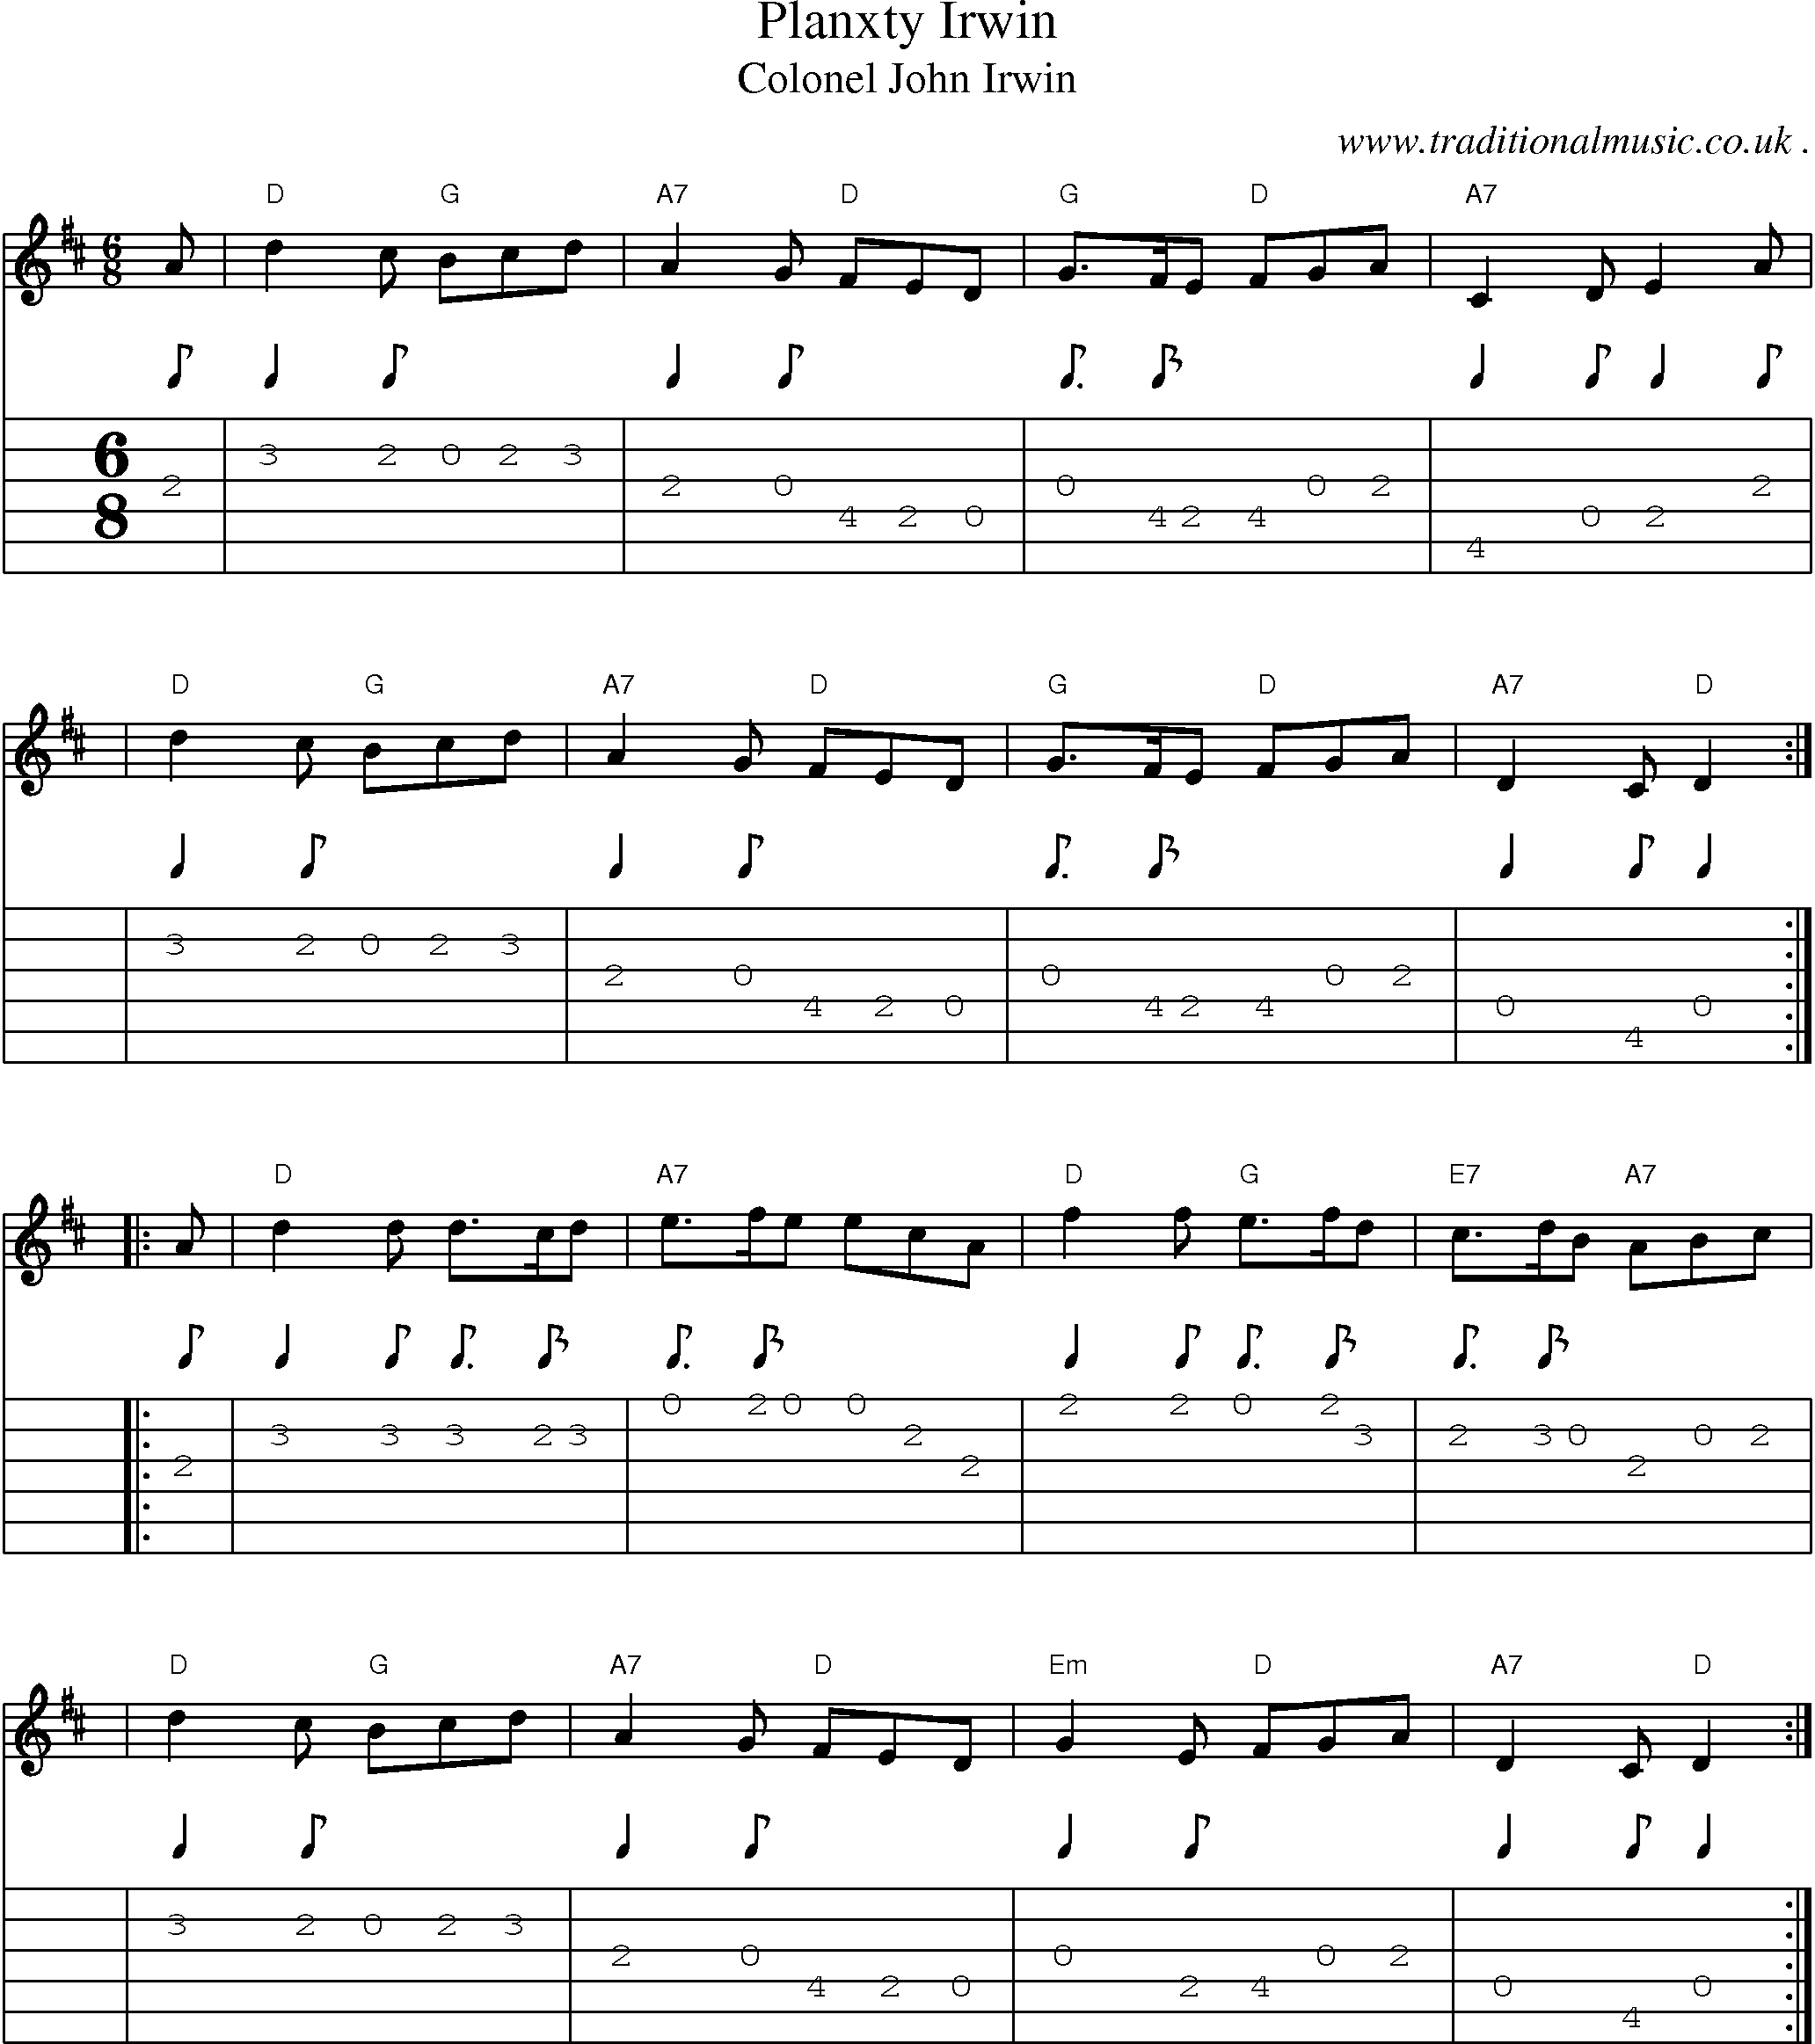 Sheet-music  score, Chords and Guitar Tabs for Planxty Irwin